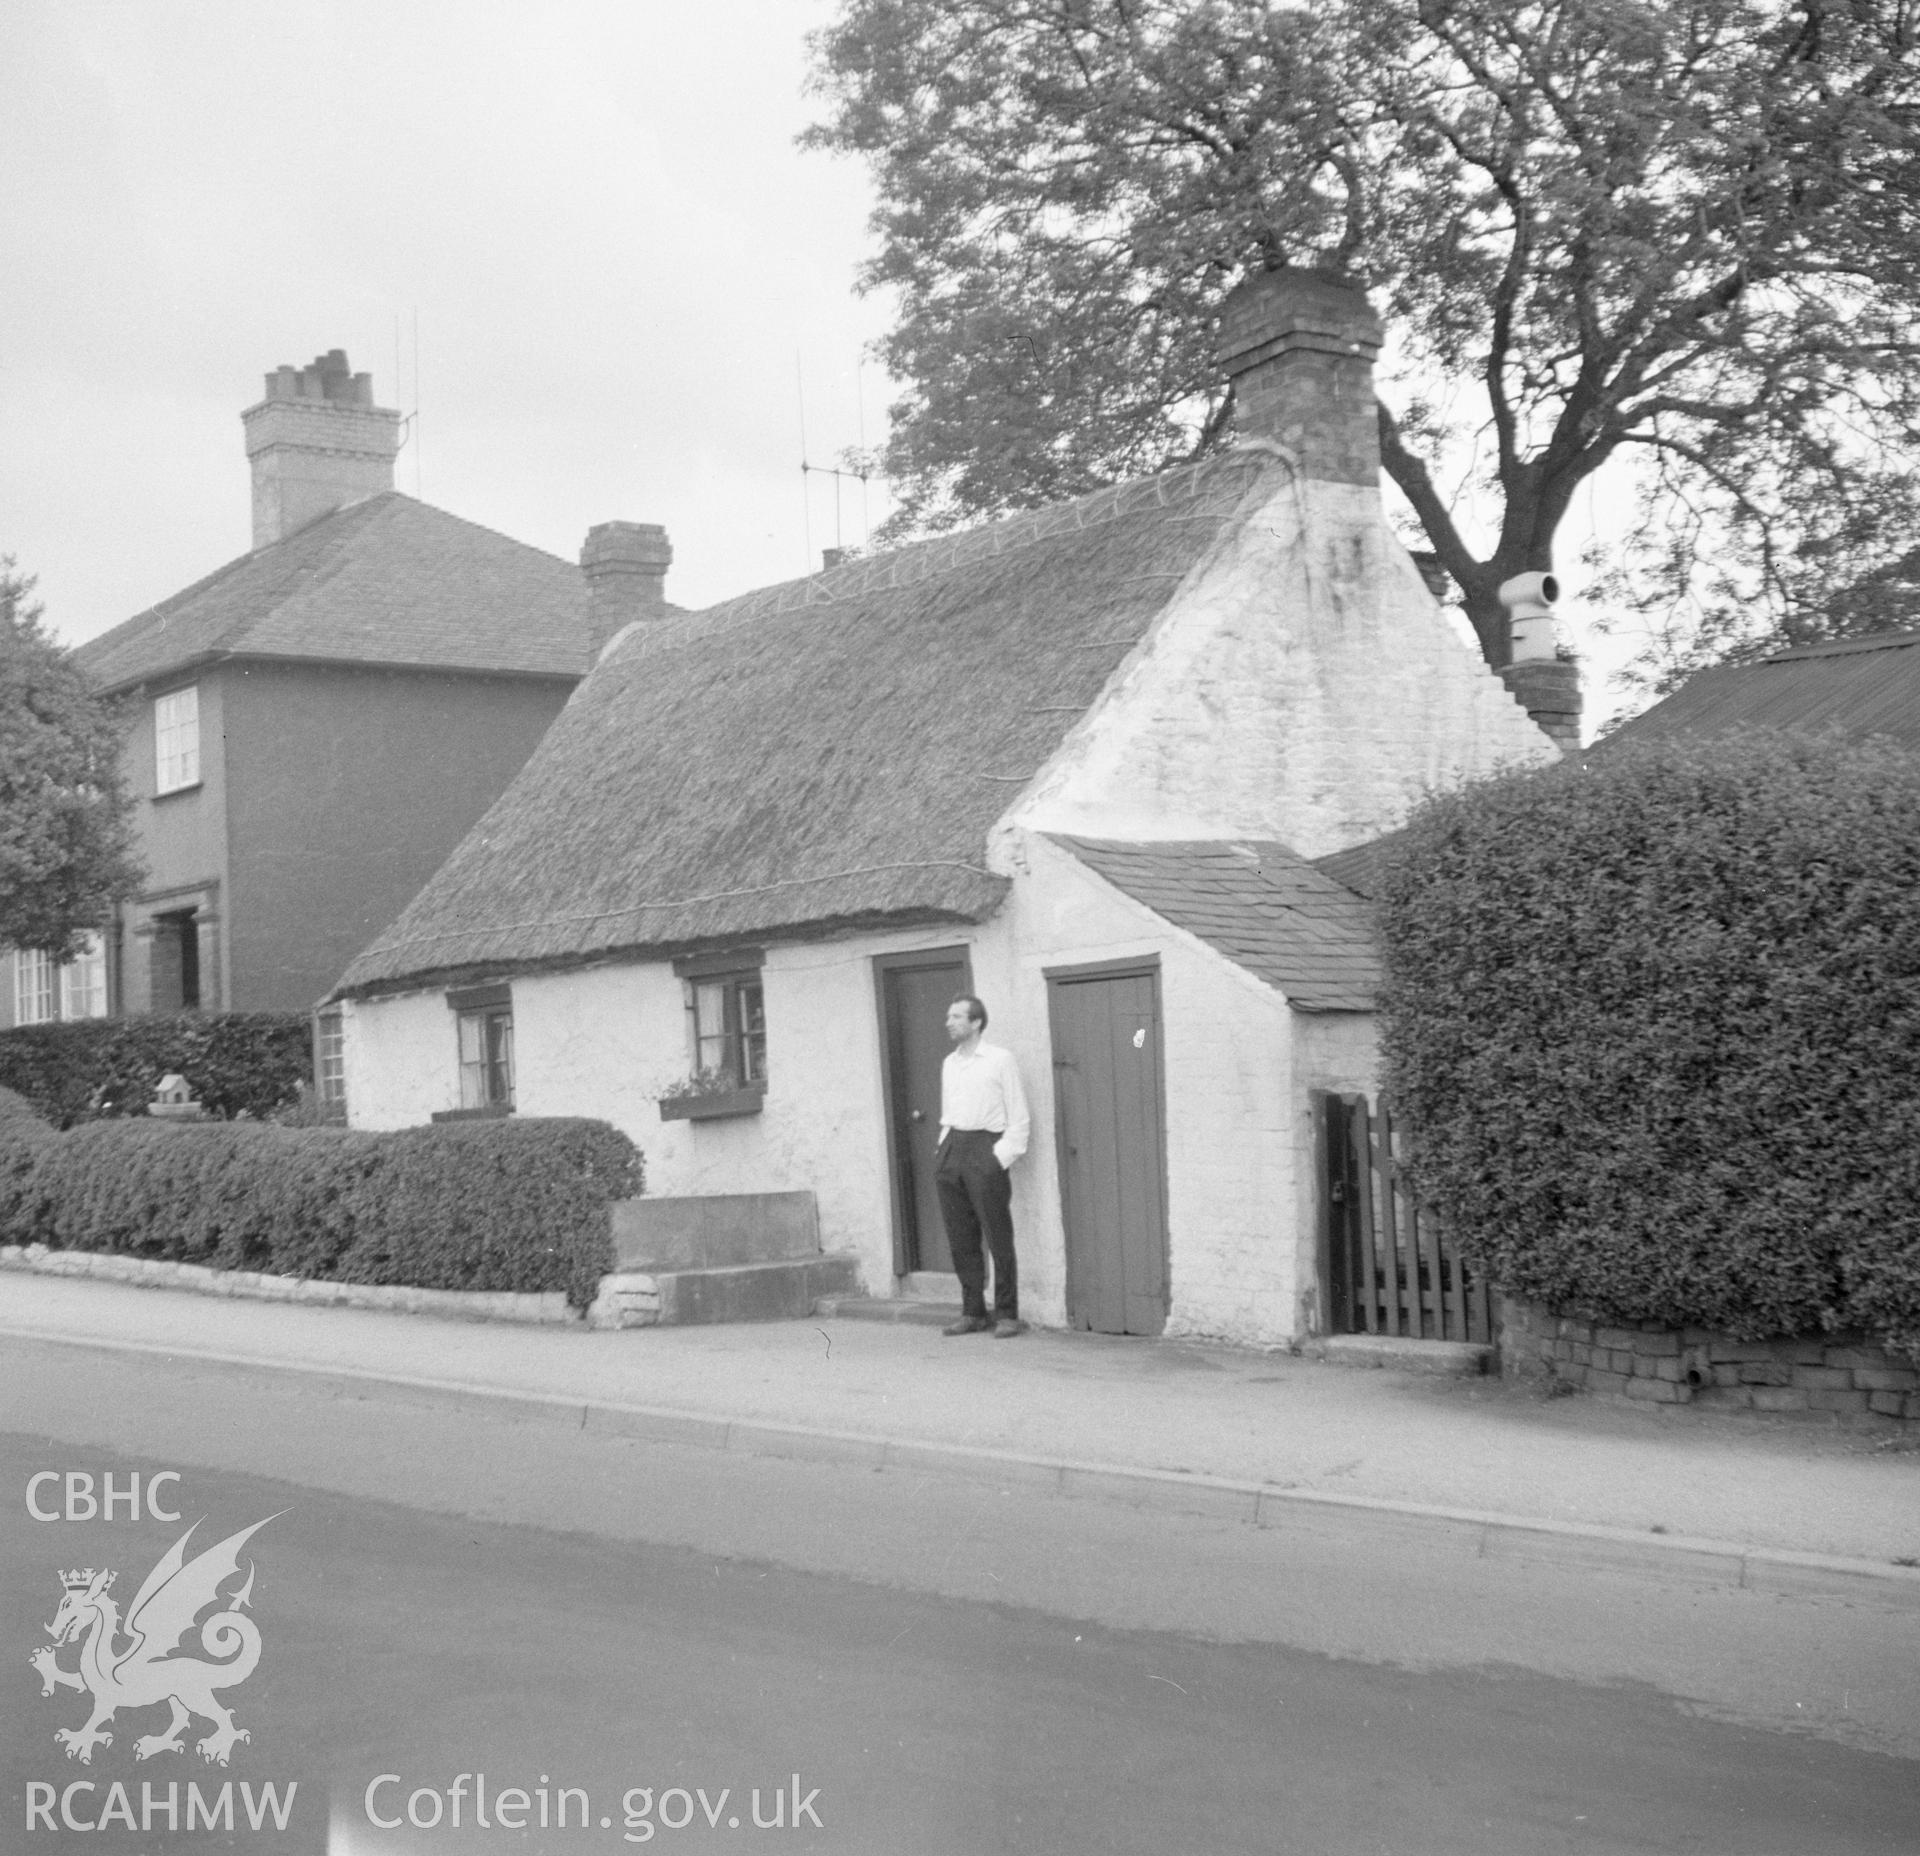 Digital copy of a black and white nitrate negative showing exterior view of an unnamed thatched cottage near Hawarden.